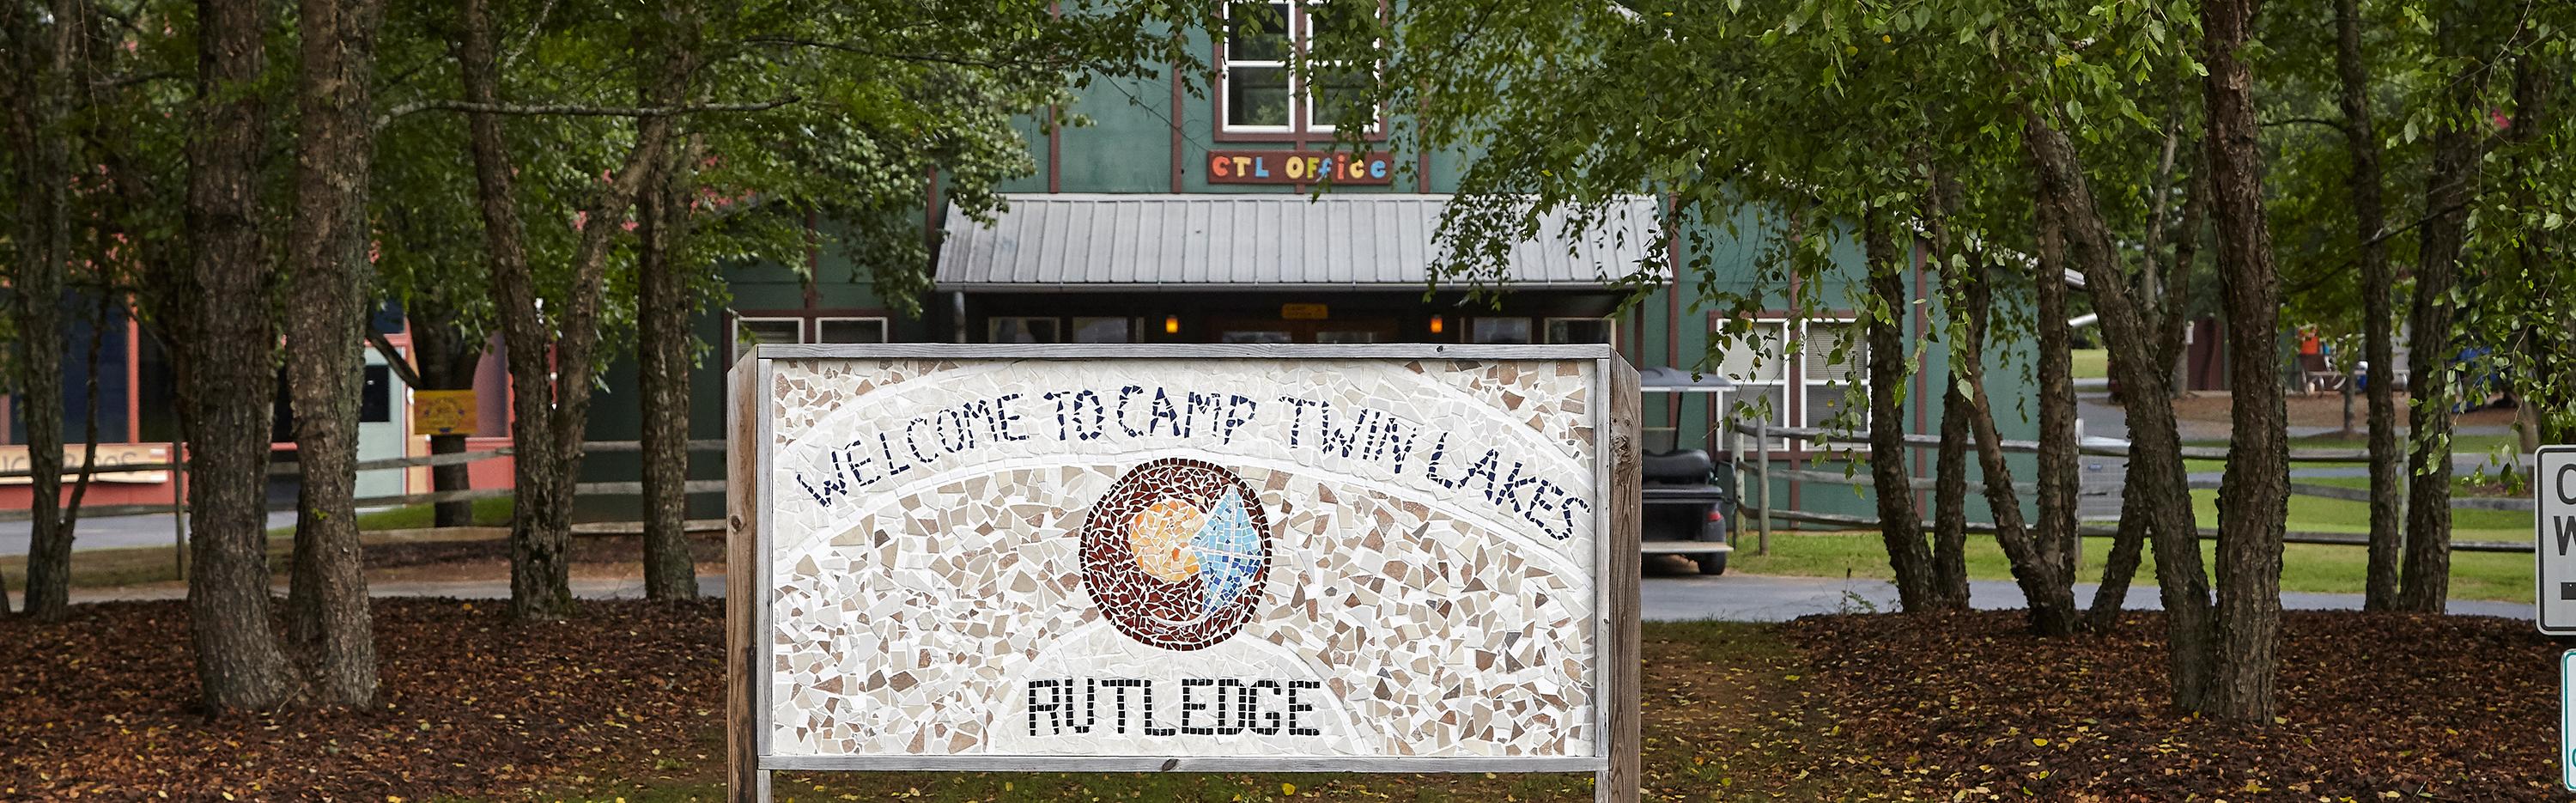 Camp Twin Lakes welcome sign